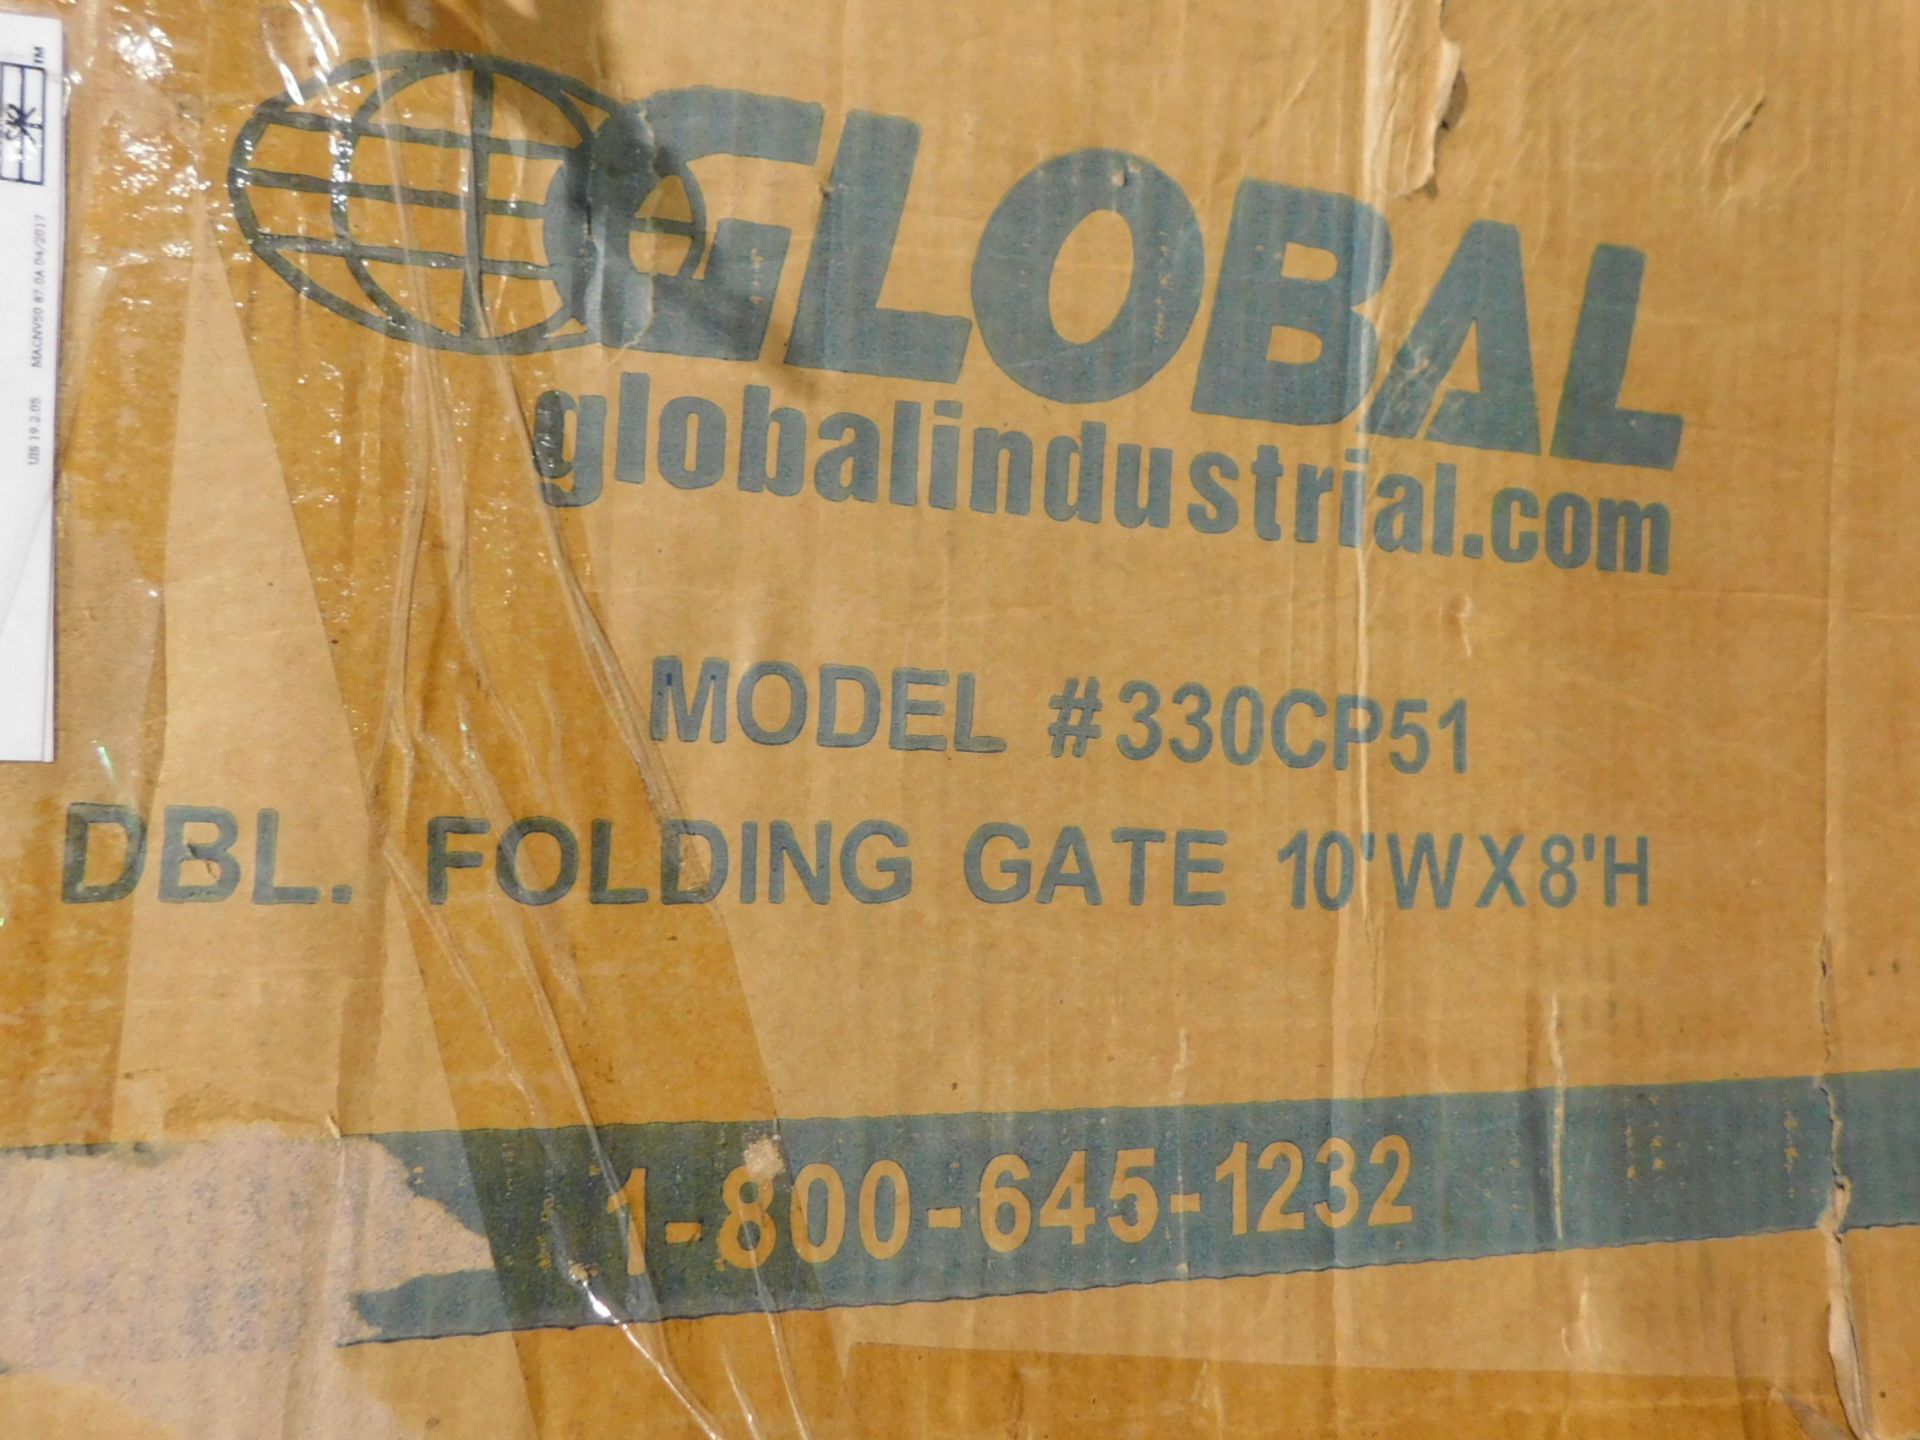 Global Model 330CP51 Double Folding Gate, 10' W x 8' H - NEW IN BOX - - Image 2 of 2